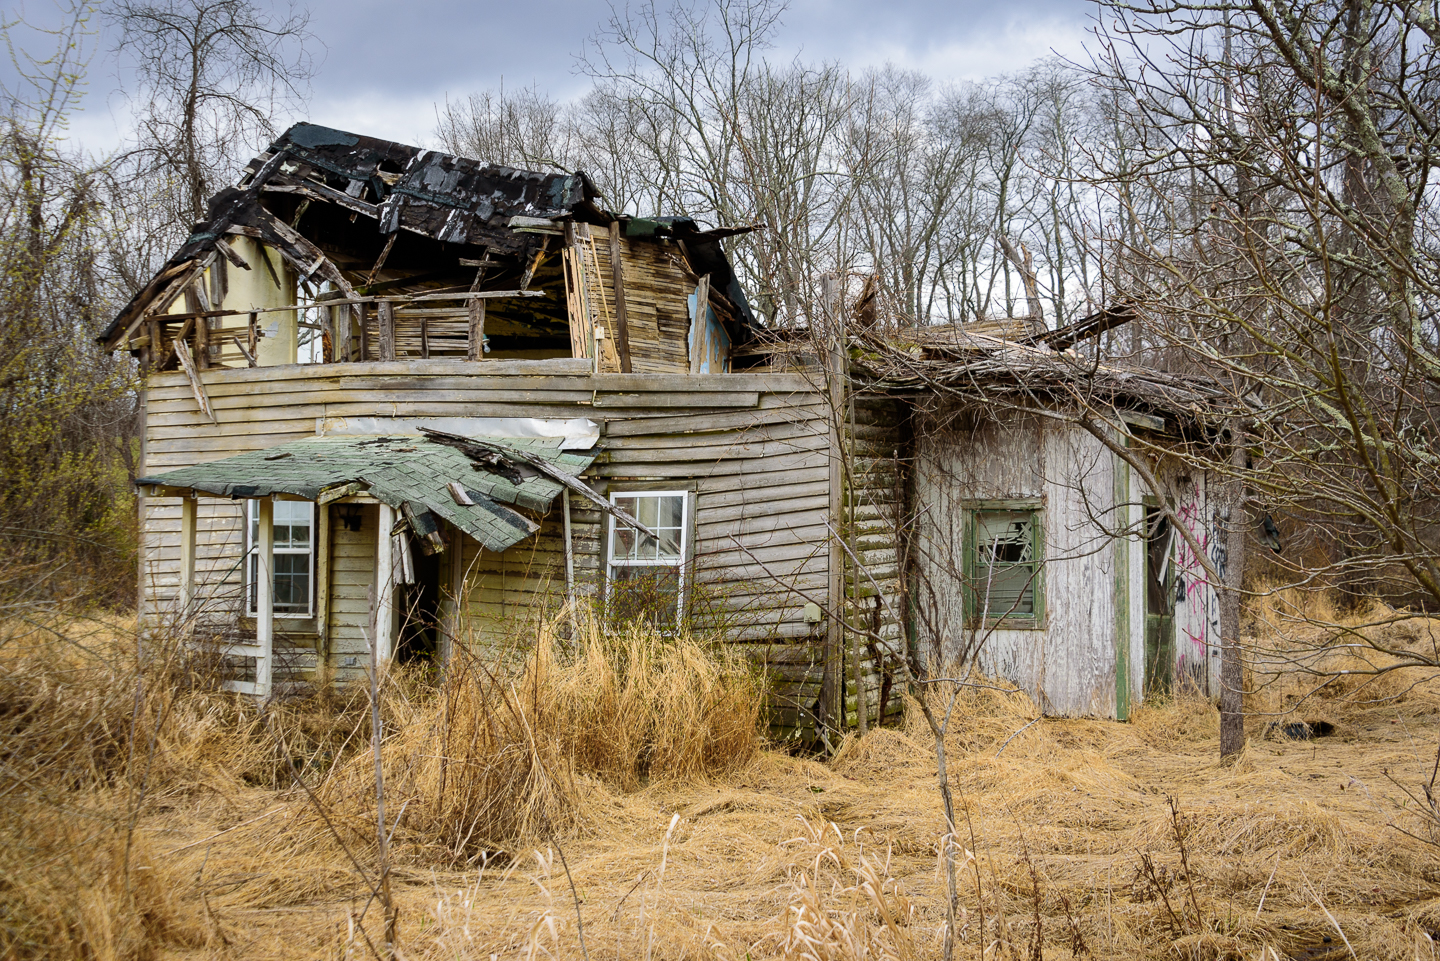 2nd PrizeAssigned Pictorial In Class 2 By Thomas Miller For Rural Abandonment MAR-2023.jpg